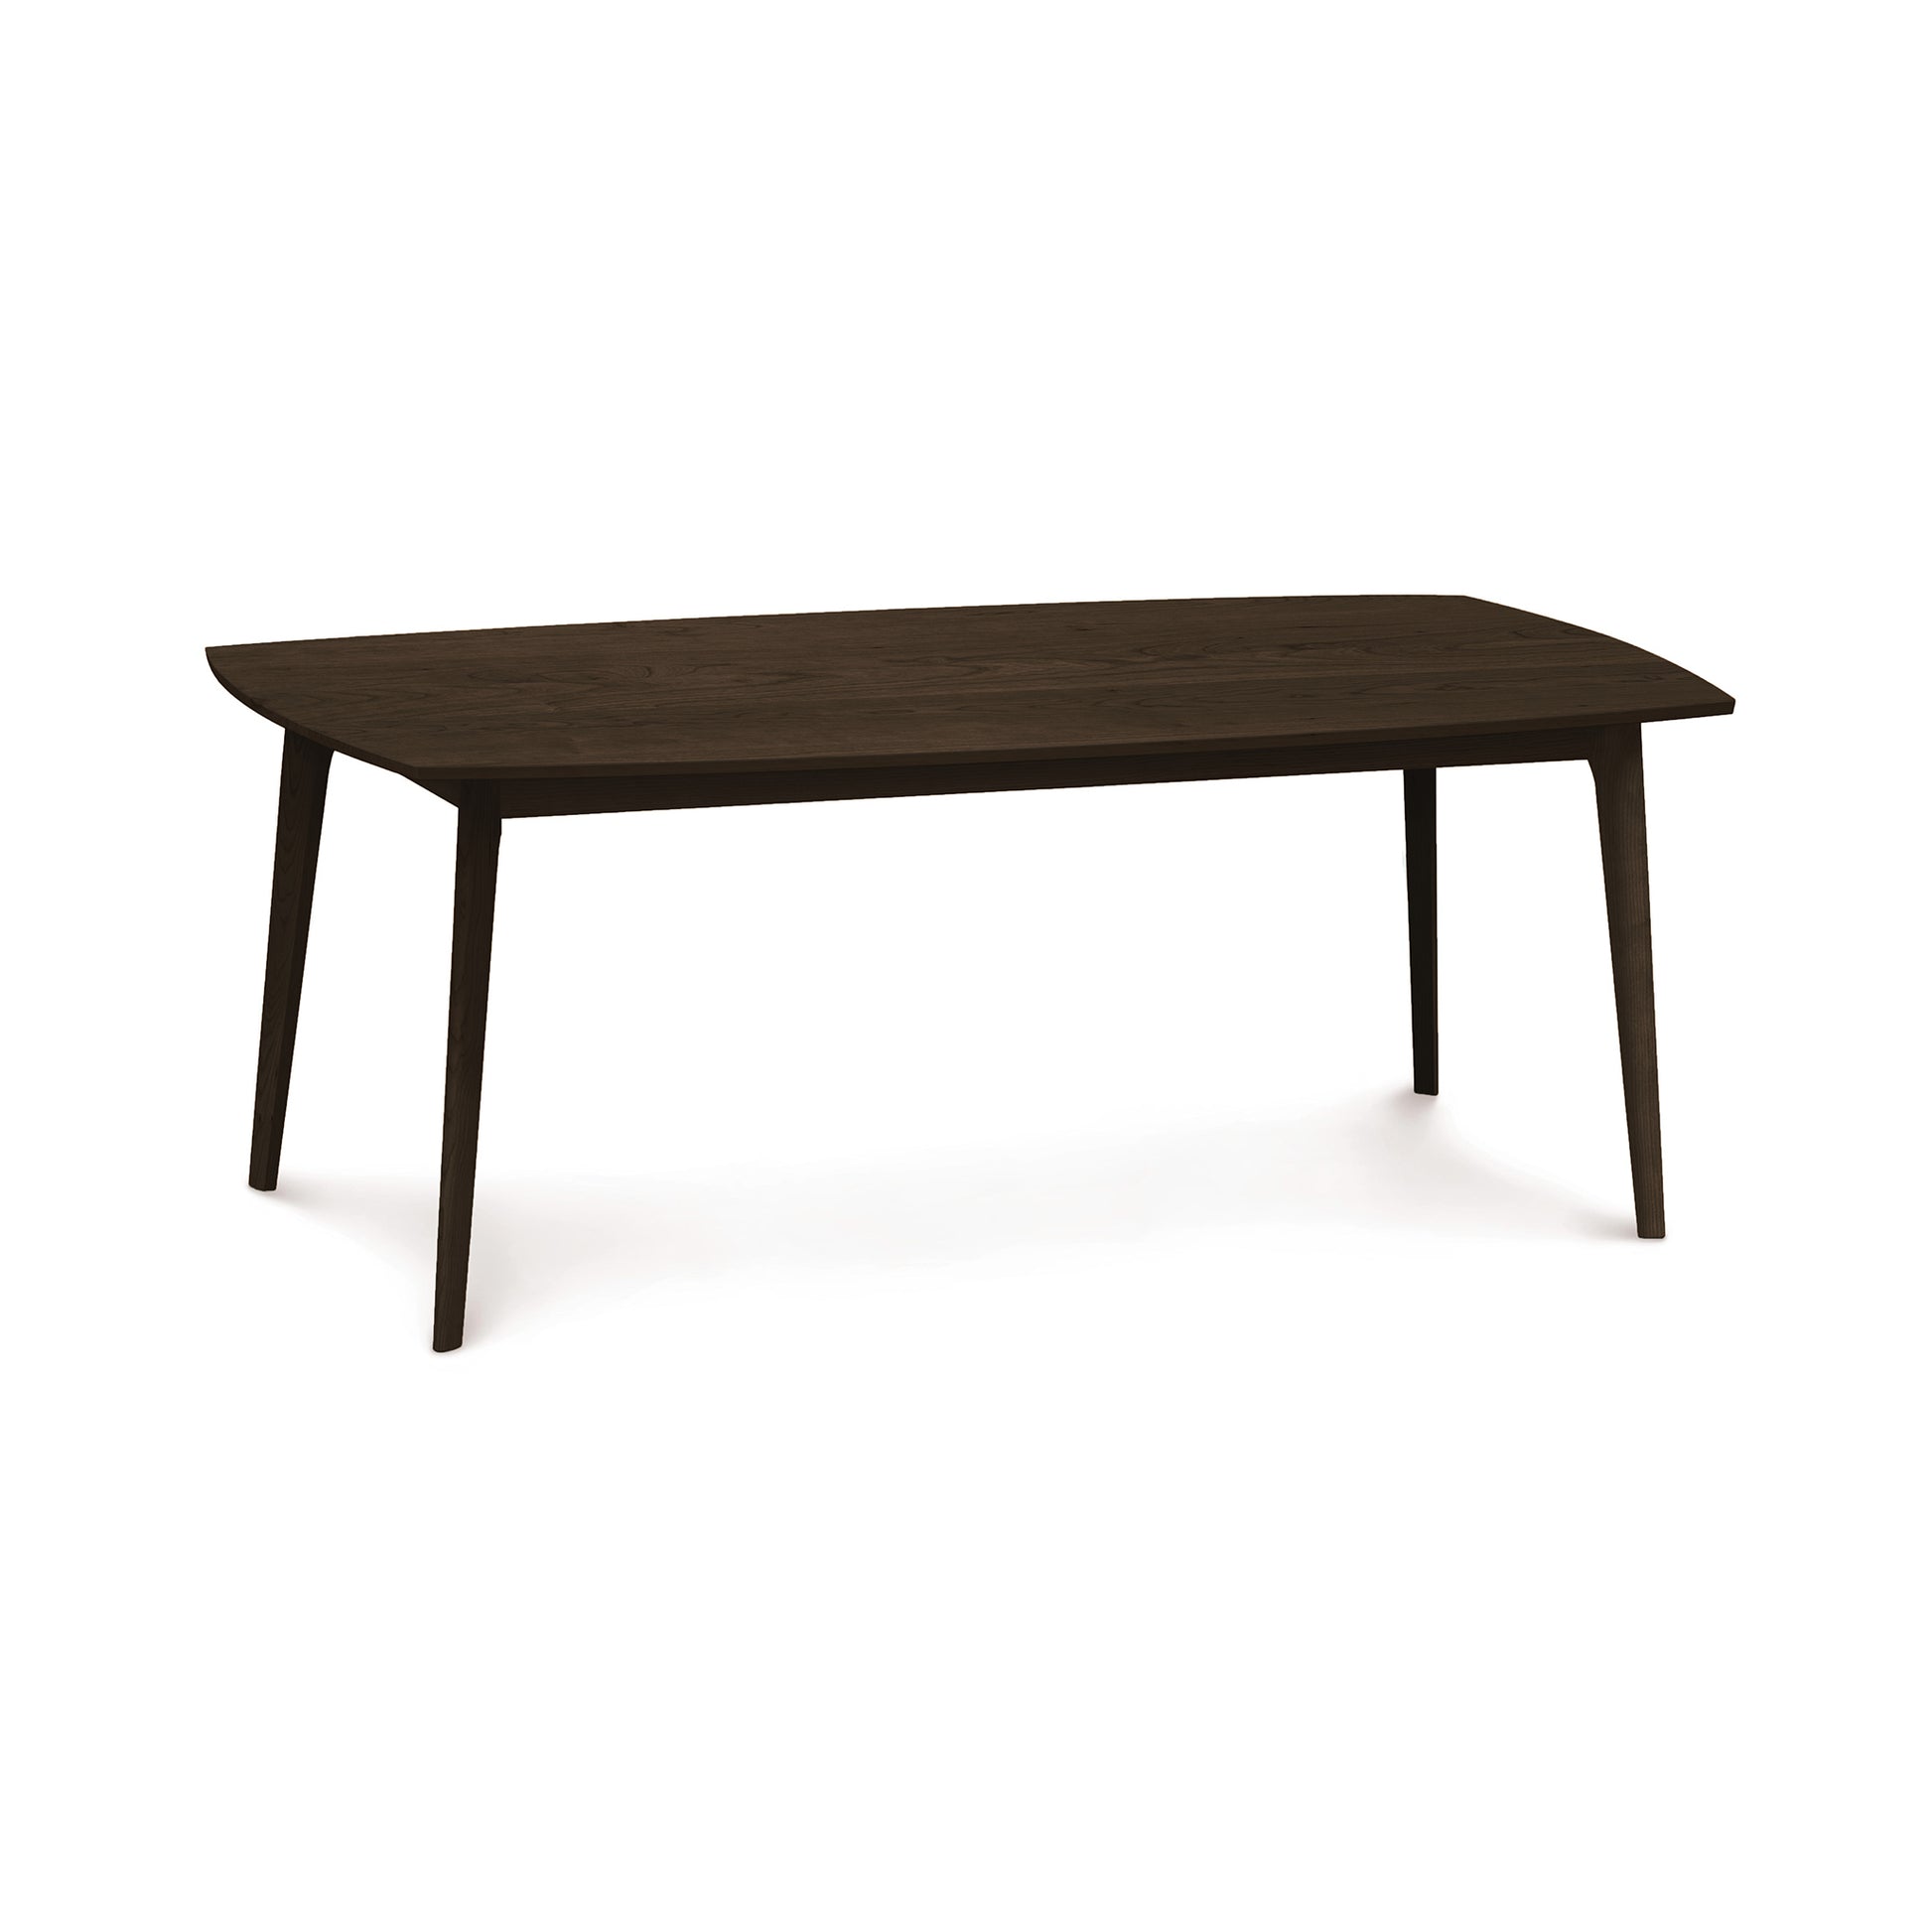 A dark, sustainably-sourced hardwood rectangular Copeland Furniture Catalina Solid-Top Table with slanted legs on a white background.